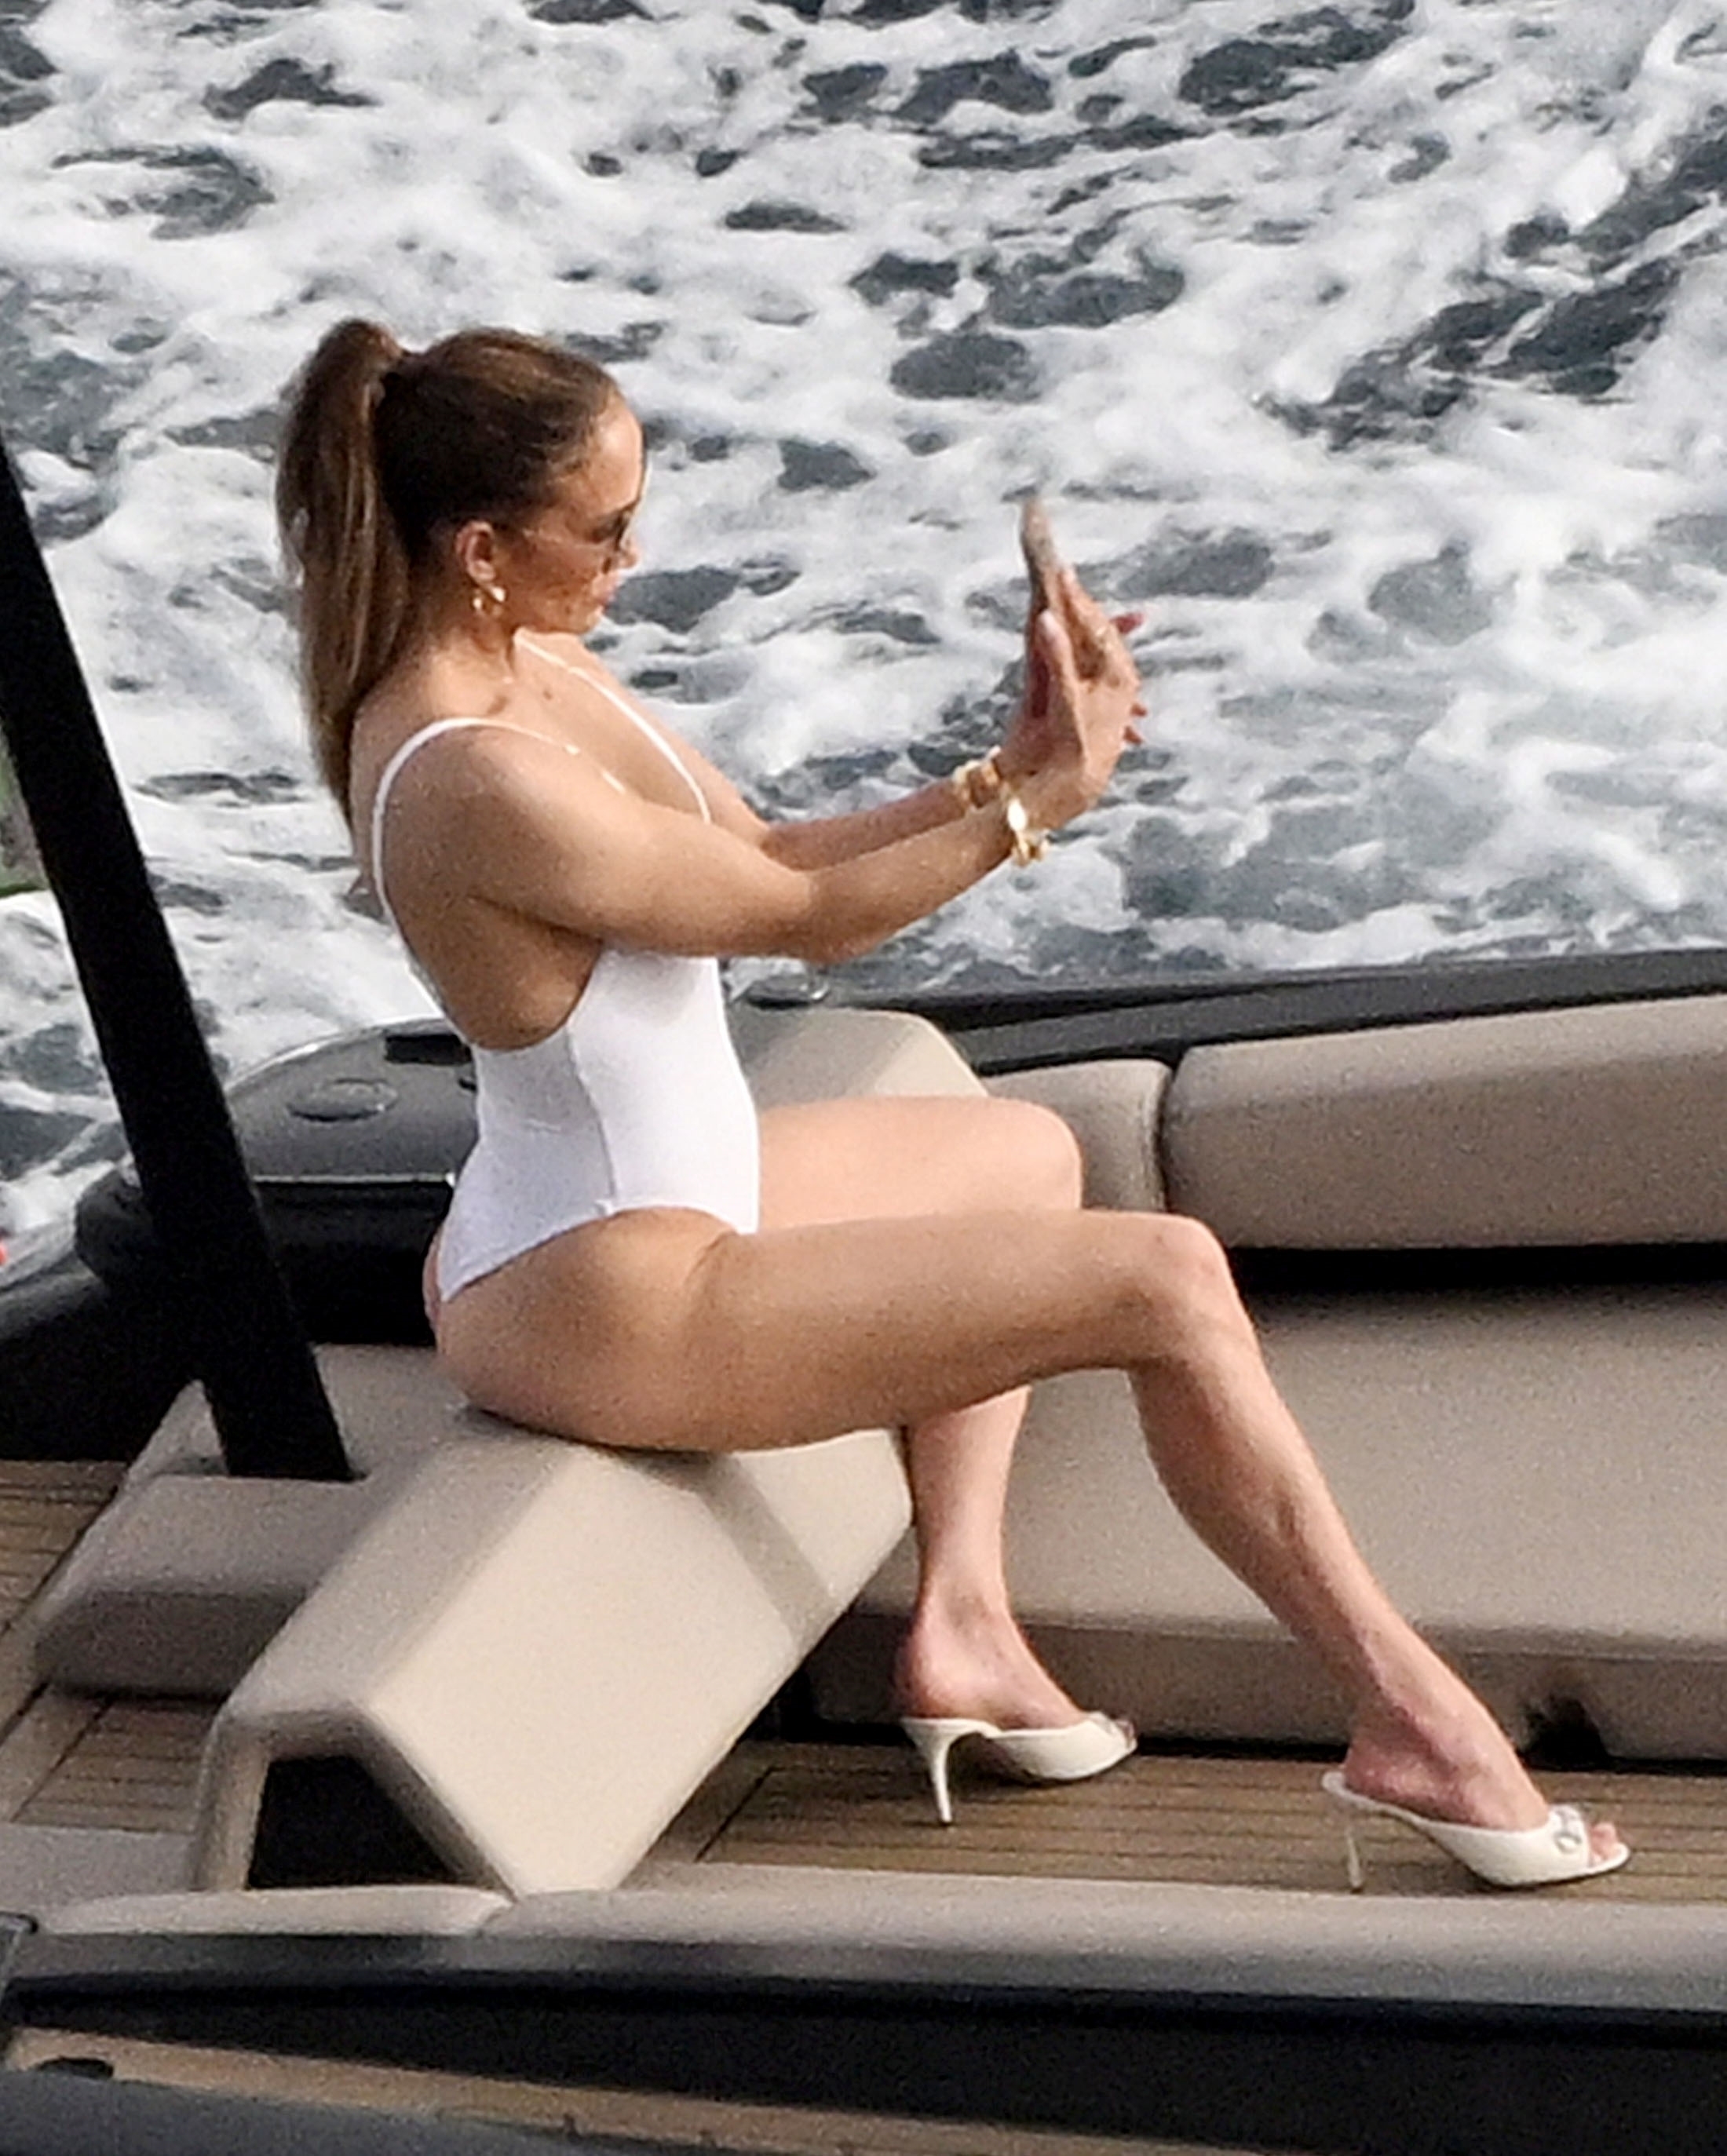 Despite her alleged marital woes, she appeared to be enjoying the speedboat trip